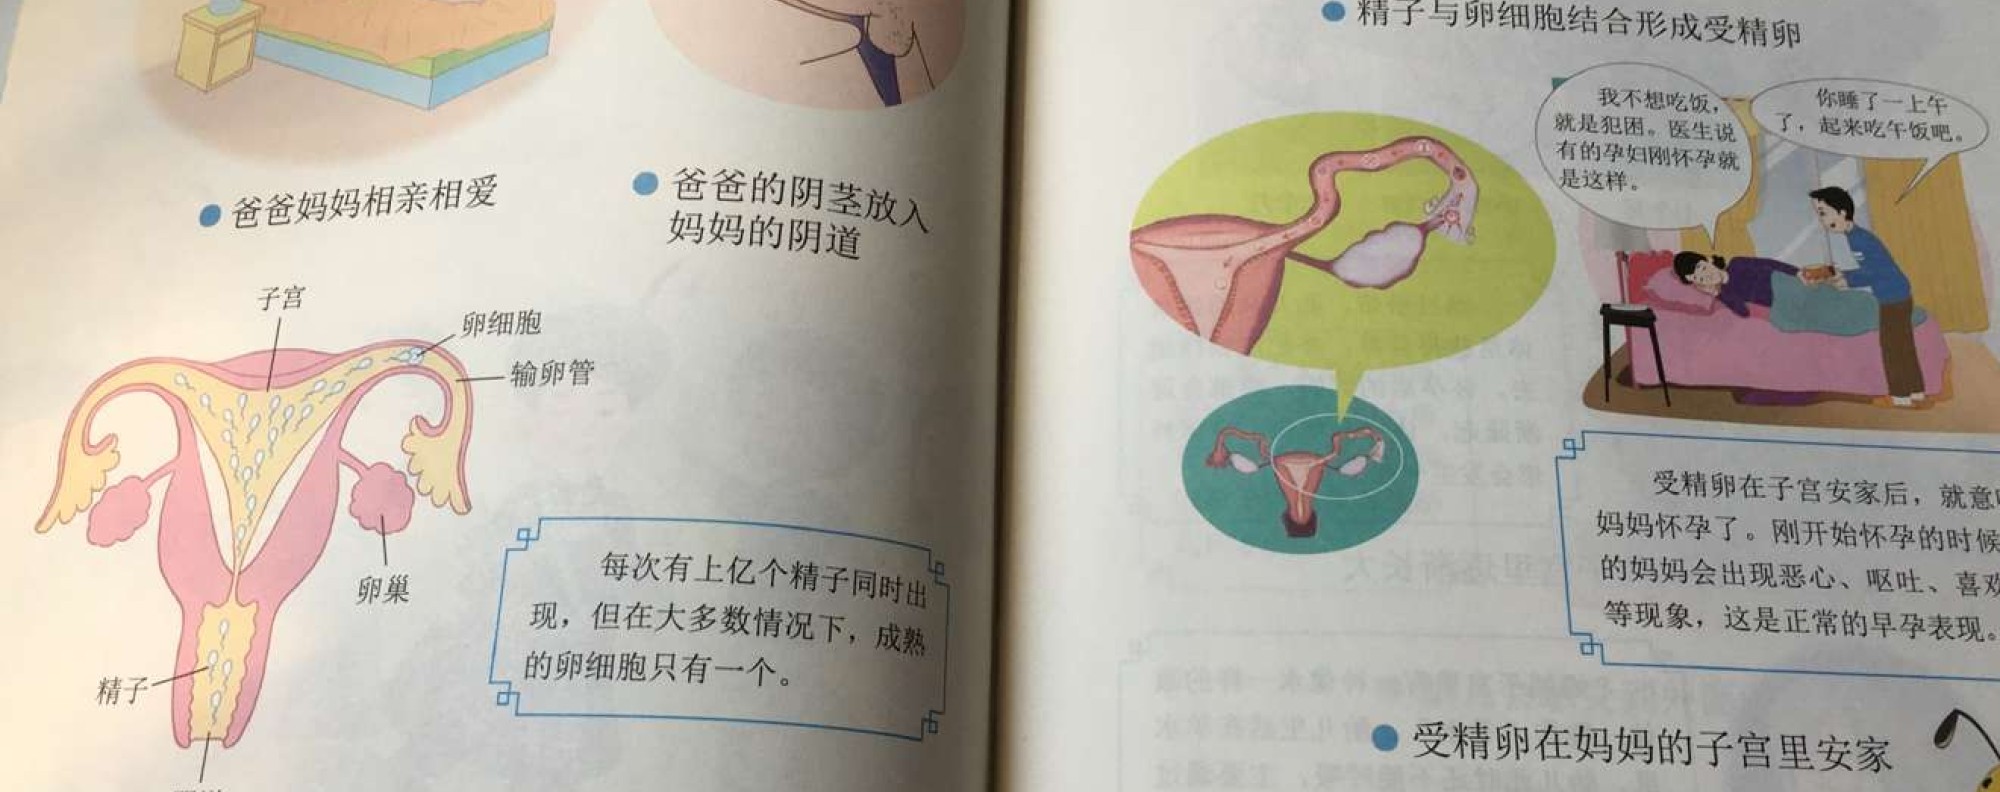 This is sex education in Jianmen